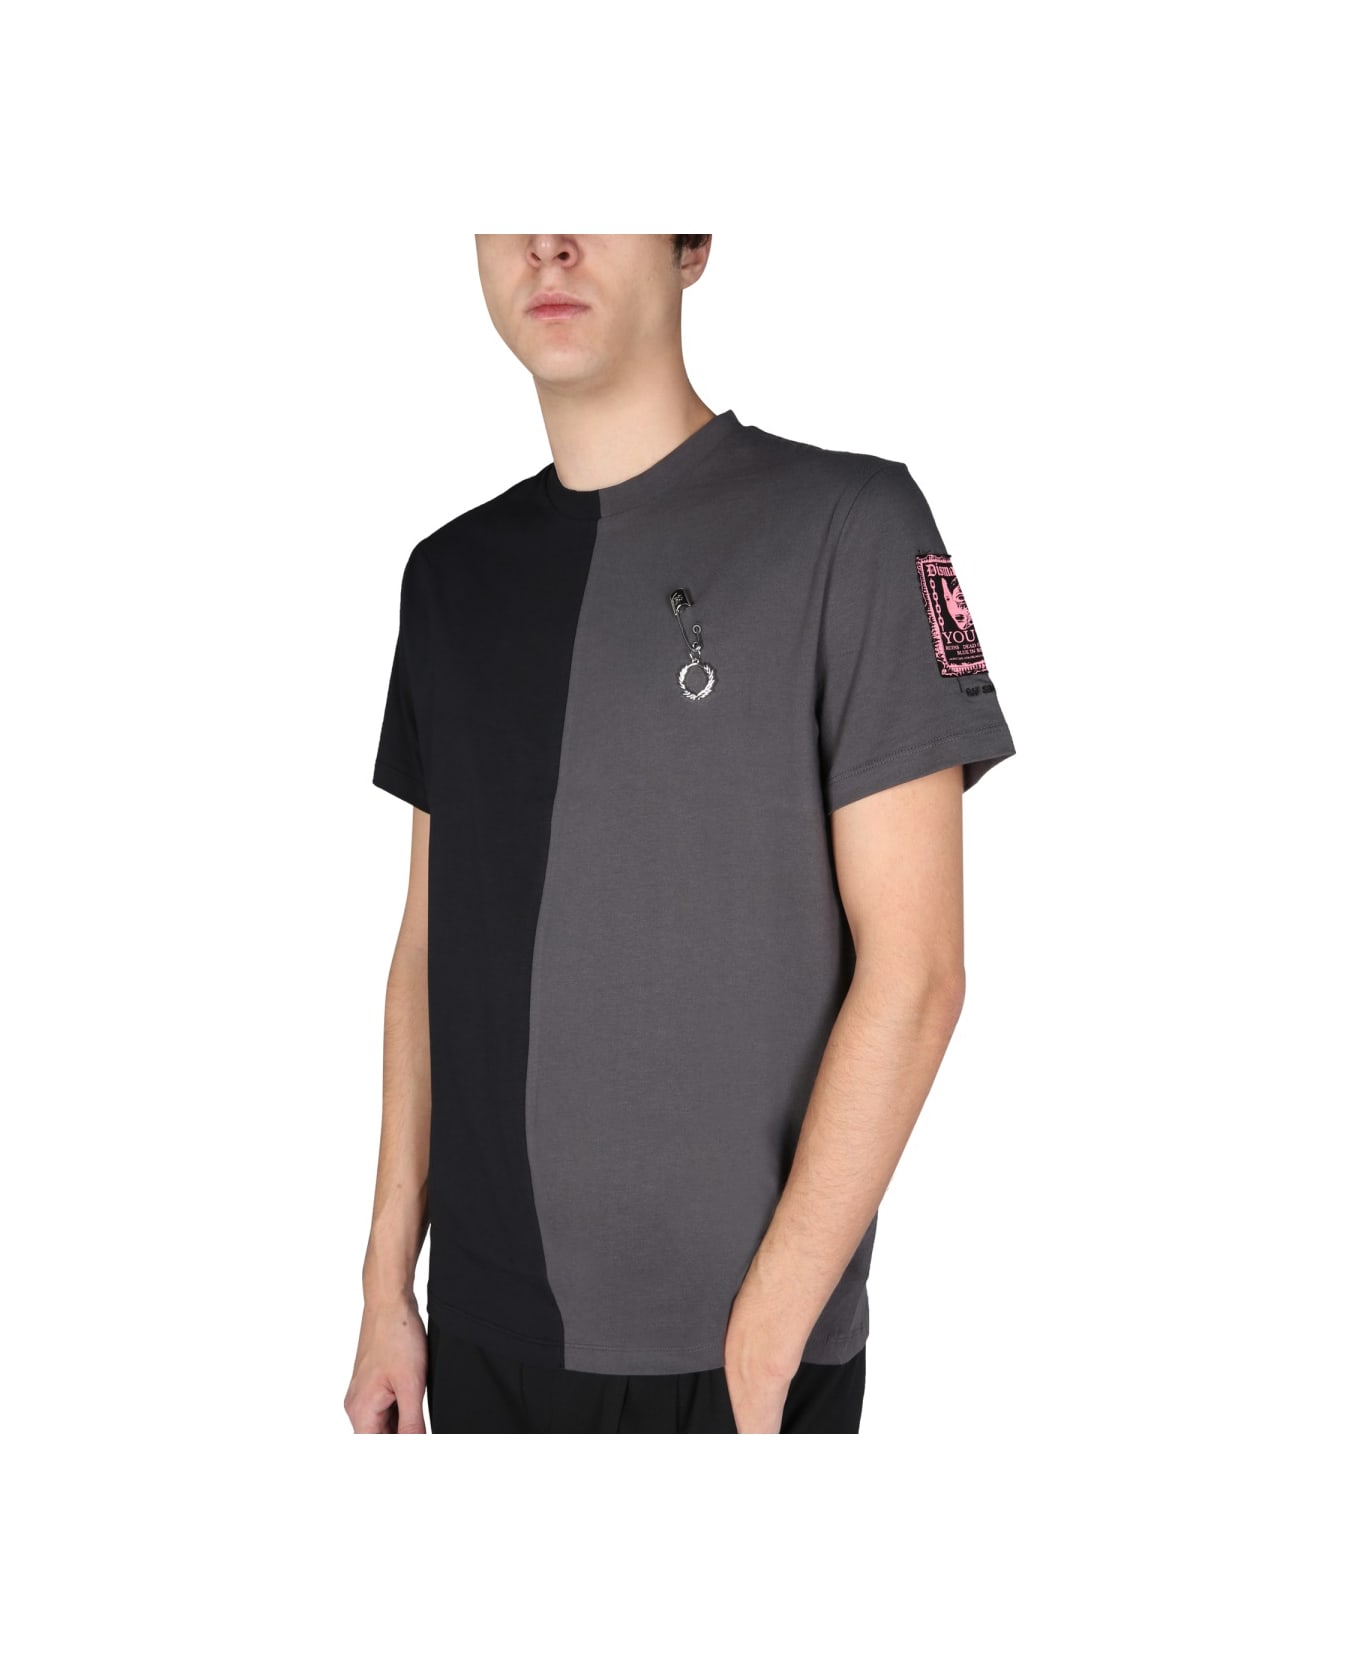 Fred Perry by Raf Simons Crewneck T-shirt - GREY シャツ